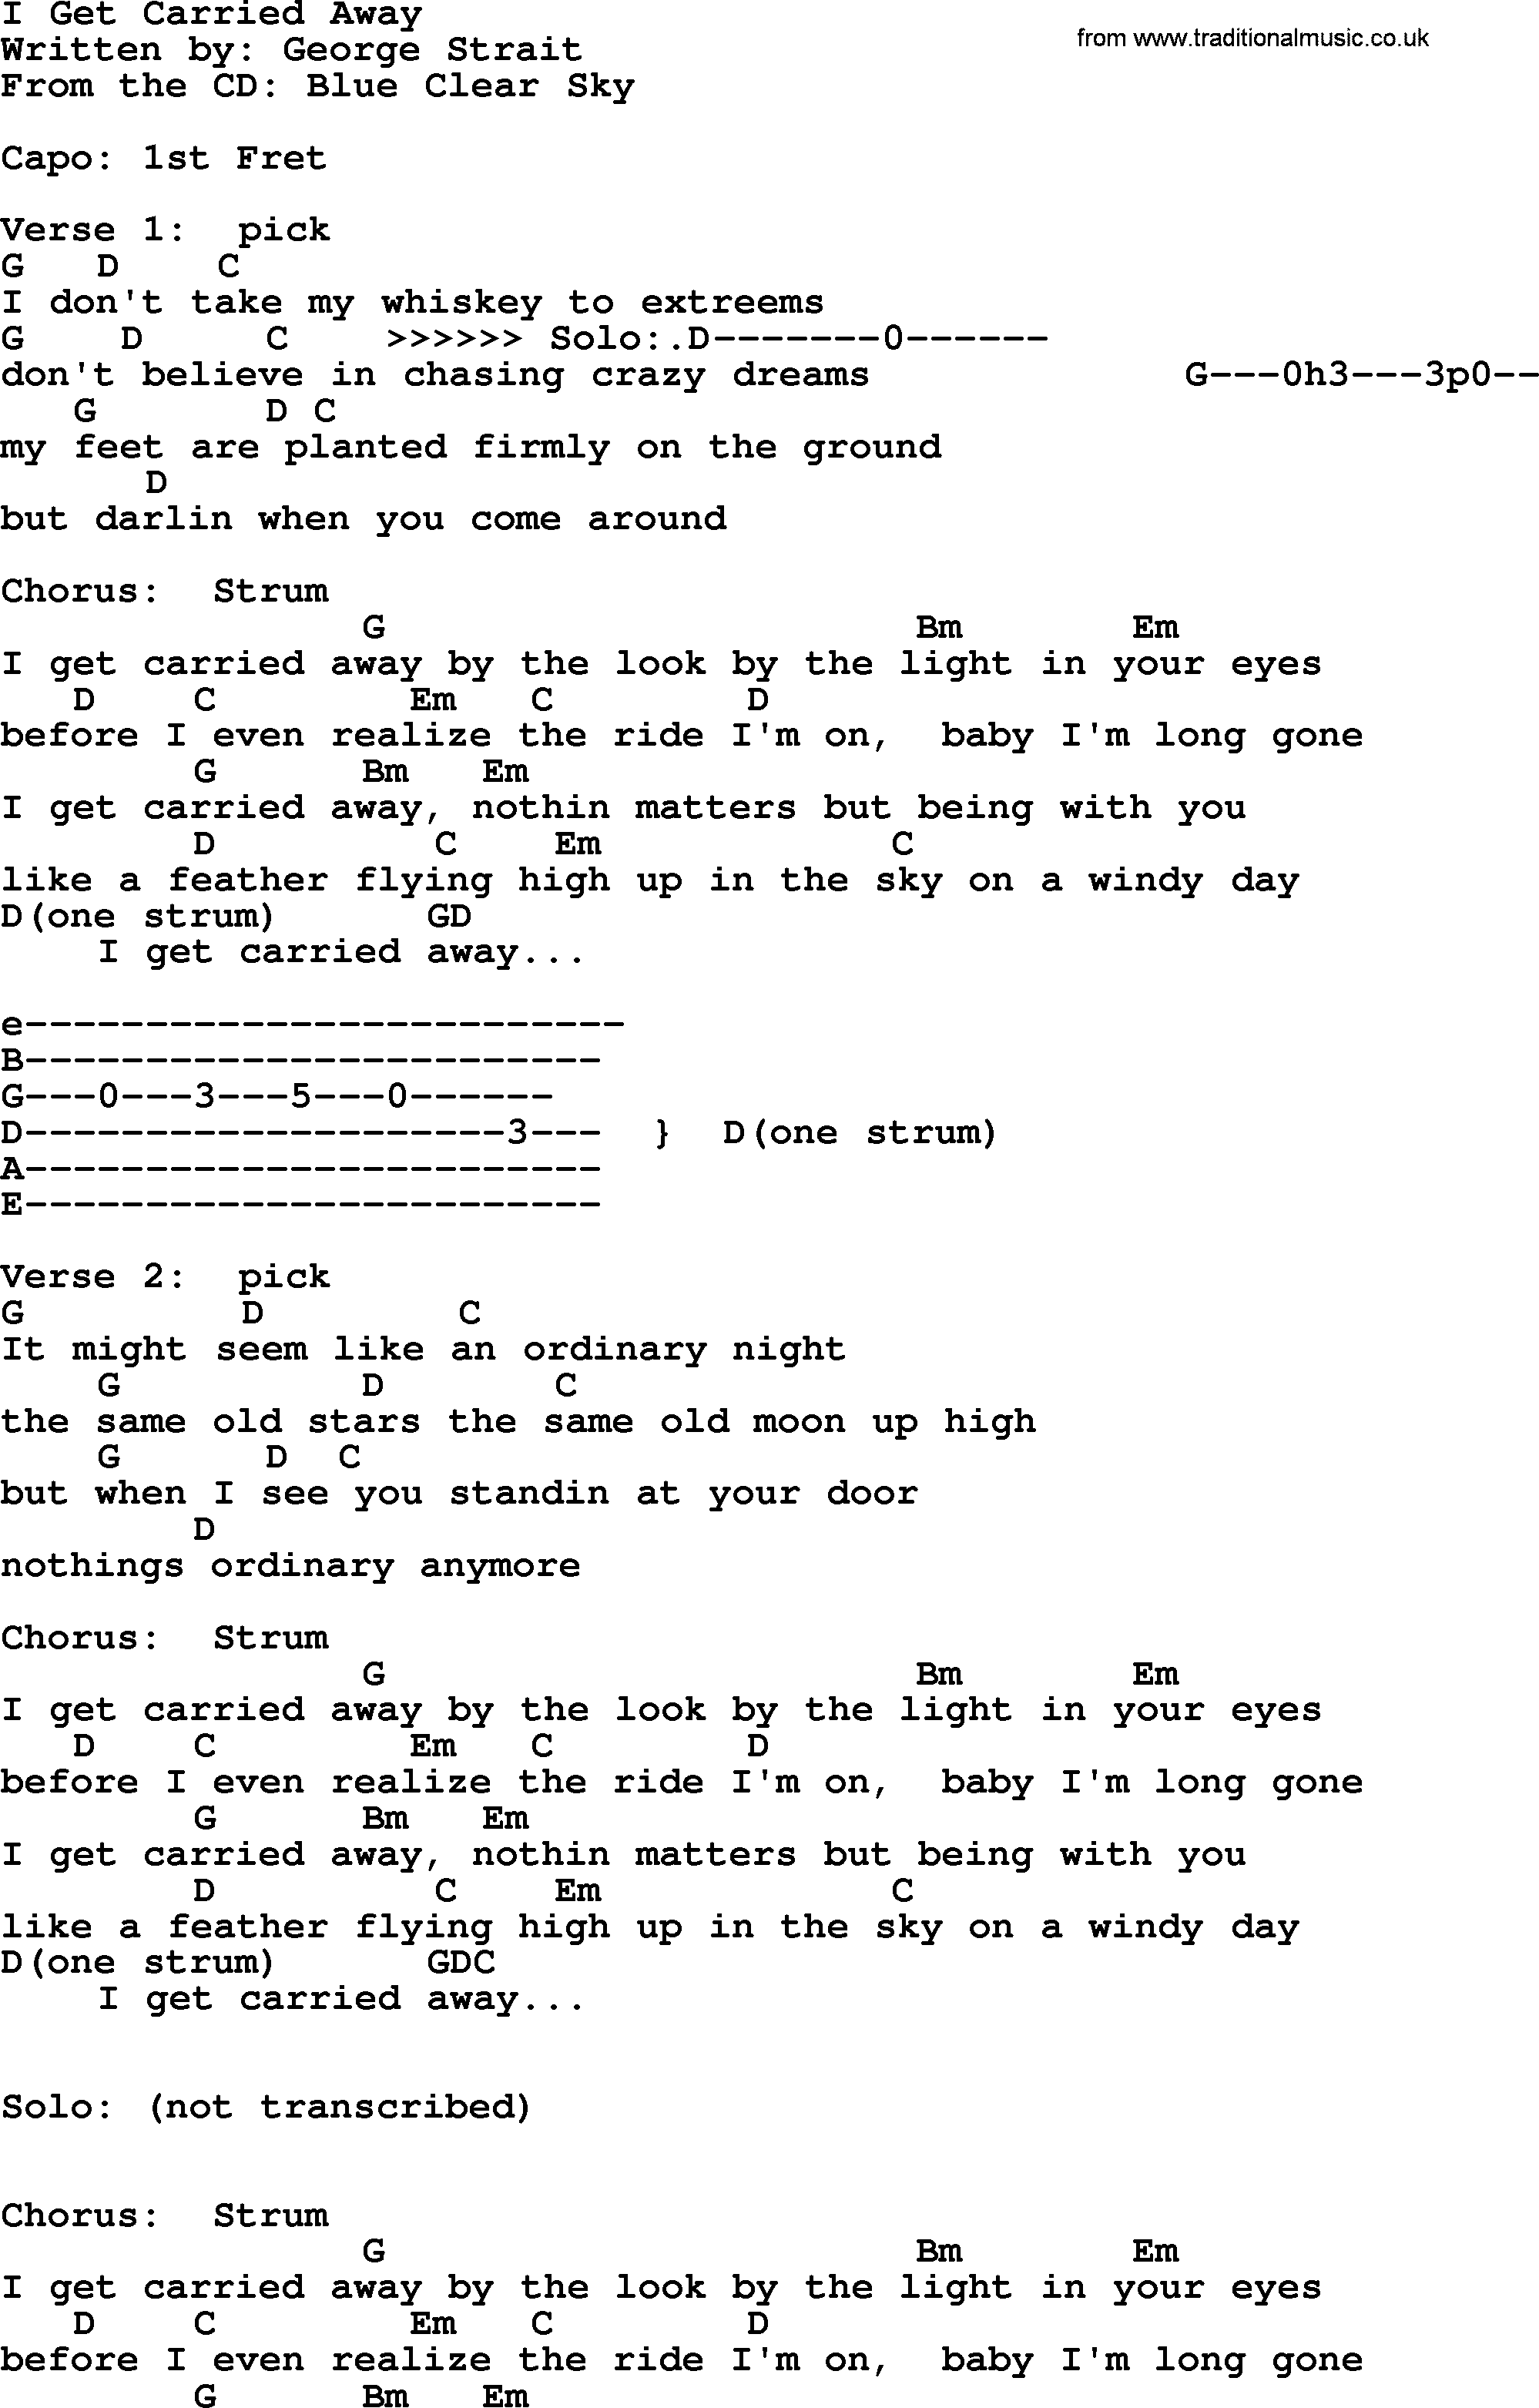 George Strait song: I Get Carried Away, lyrics and chords